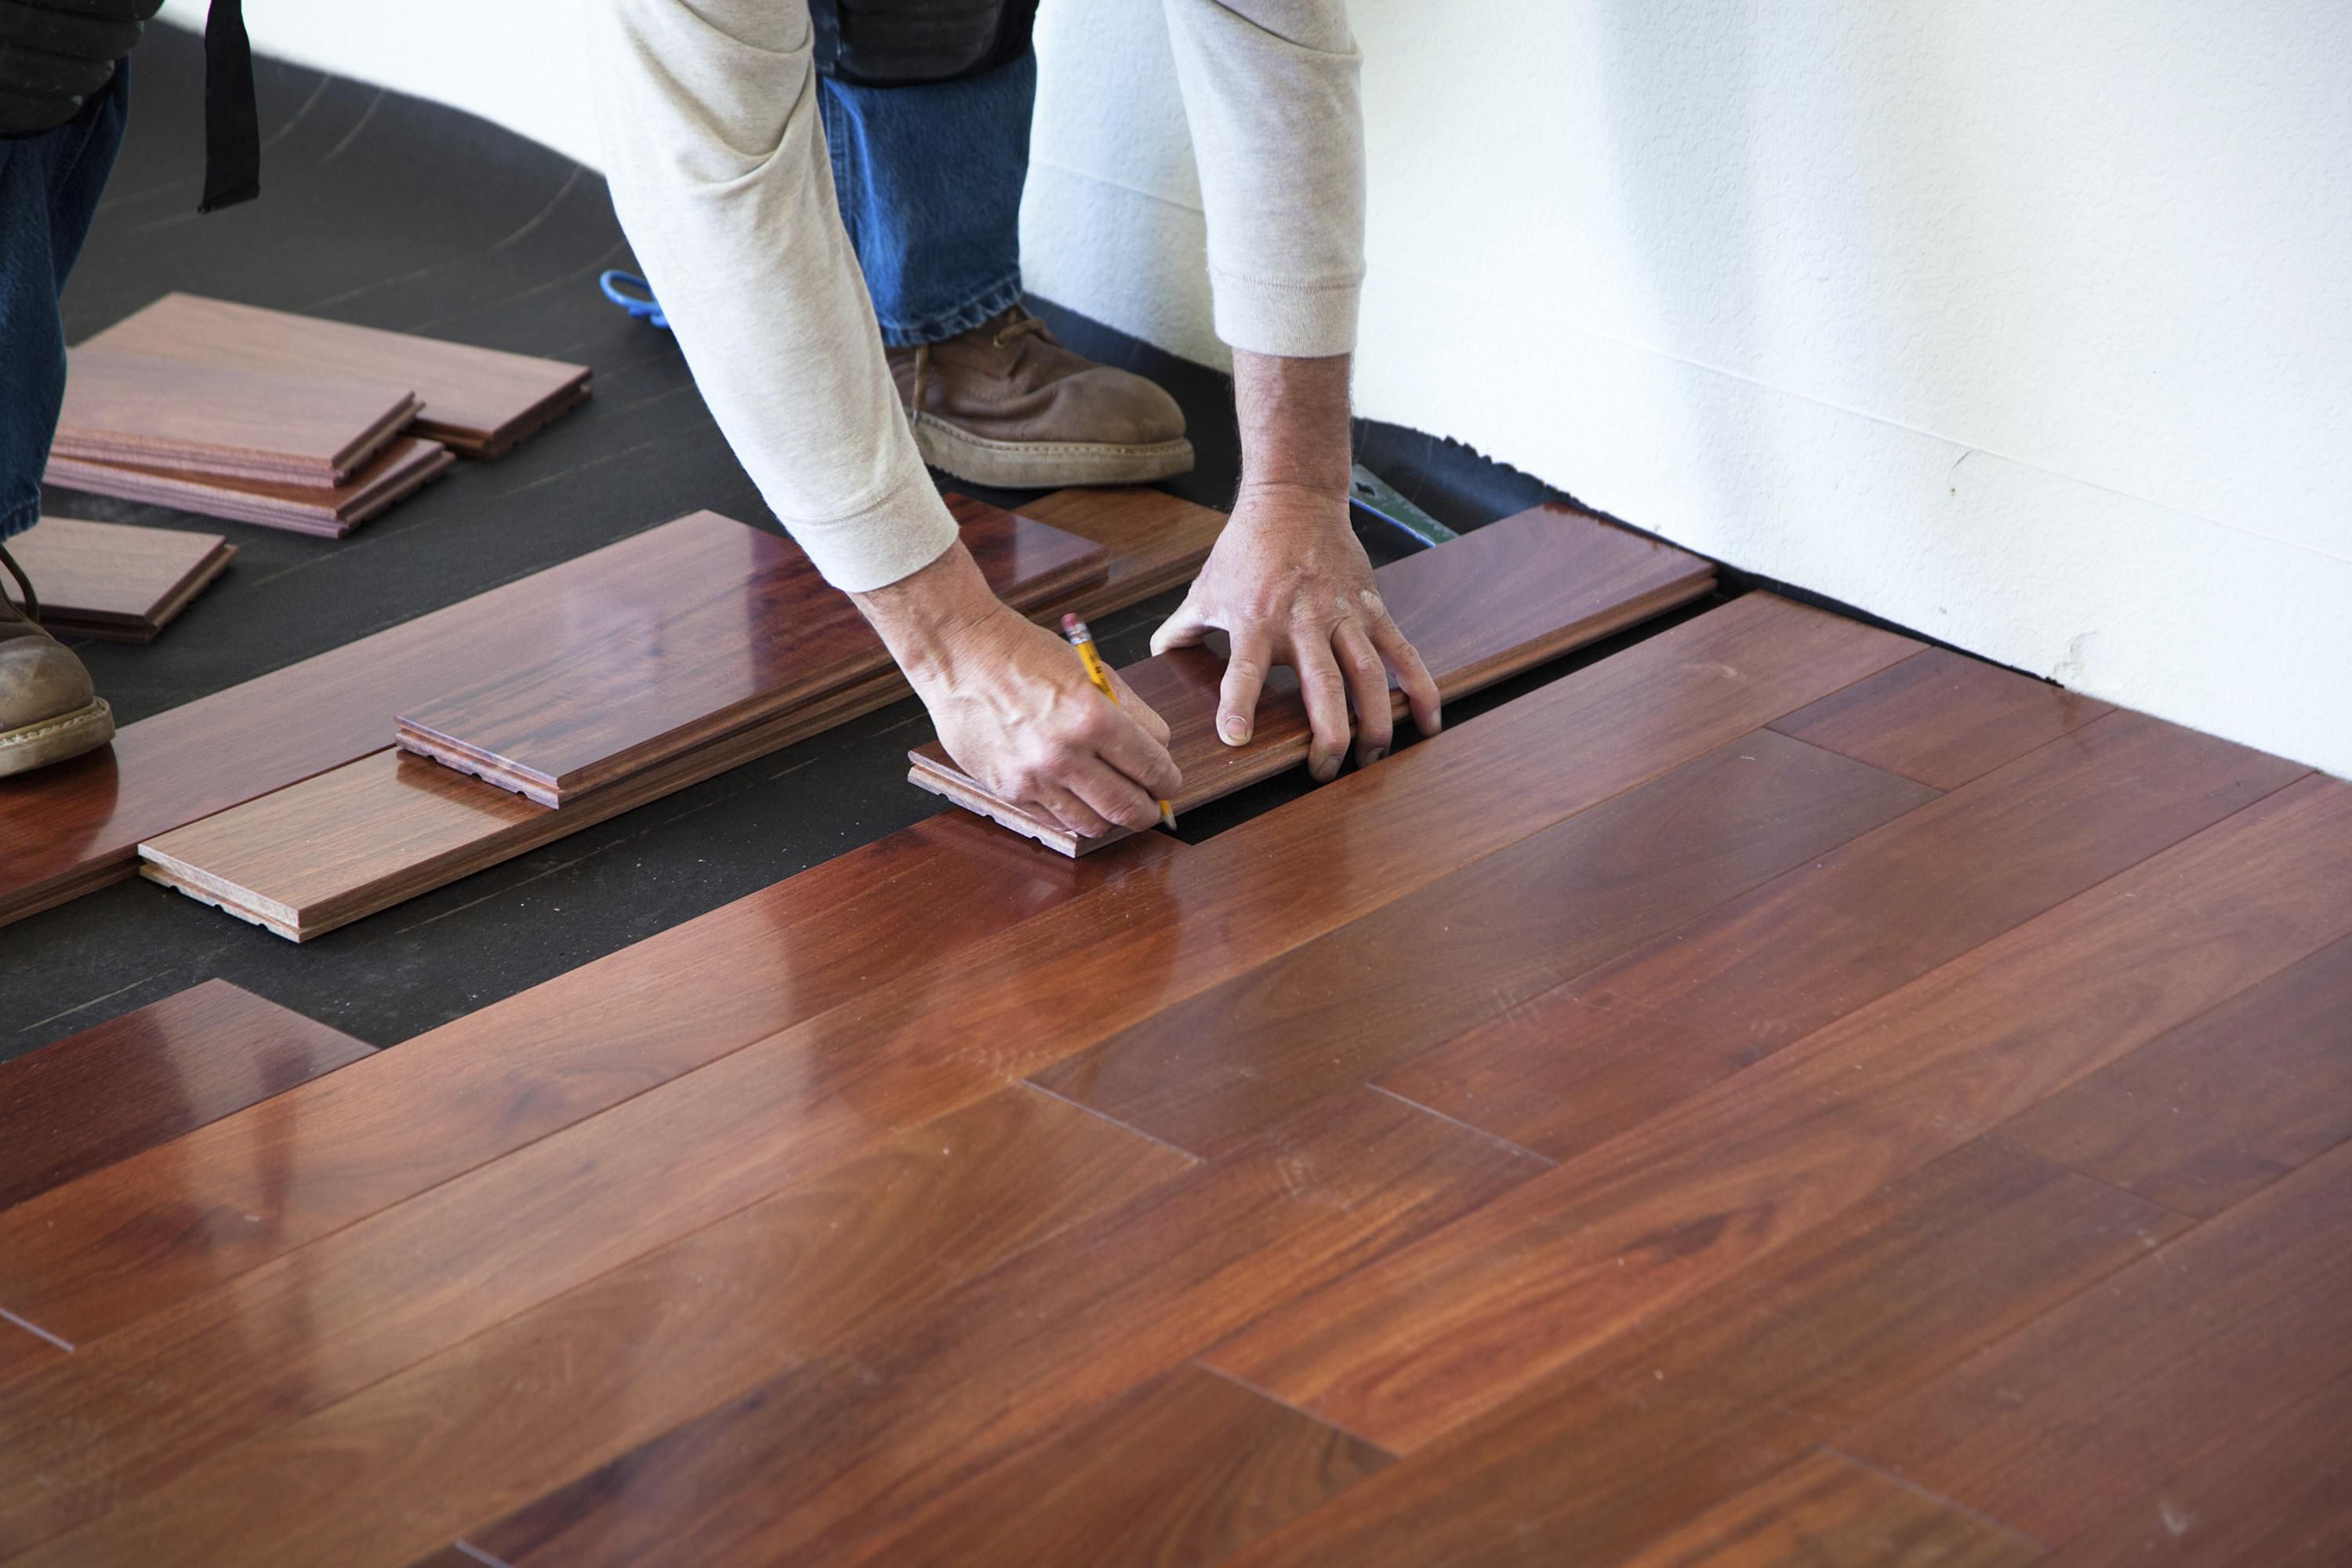 hardwood floor refinishing average cost per square foot of this is how much hardwood flooring to order regarding 170040982 56a49f213df78cf772834e21